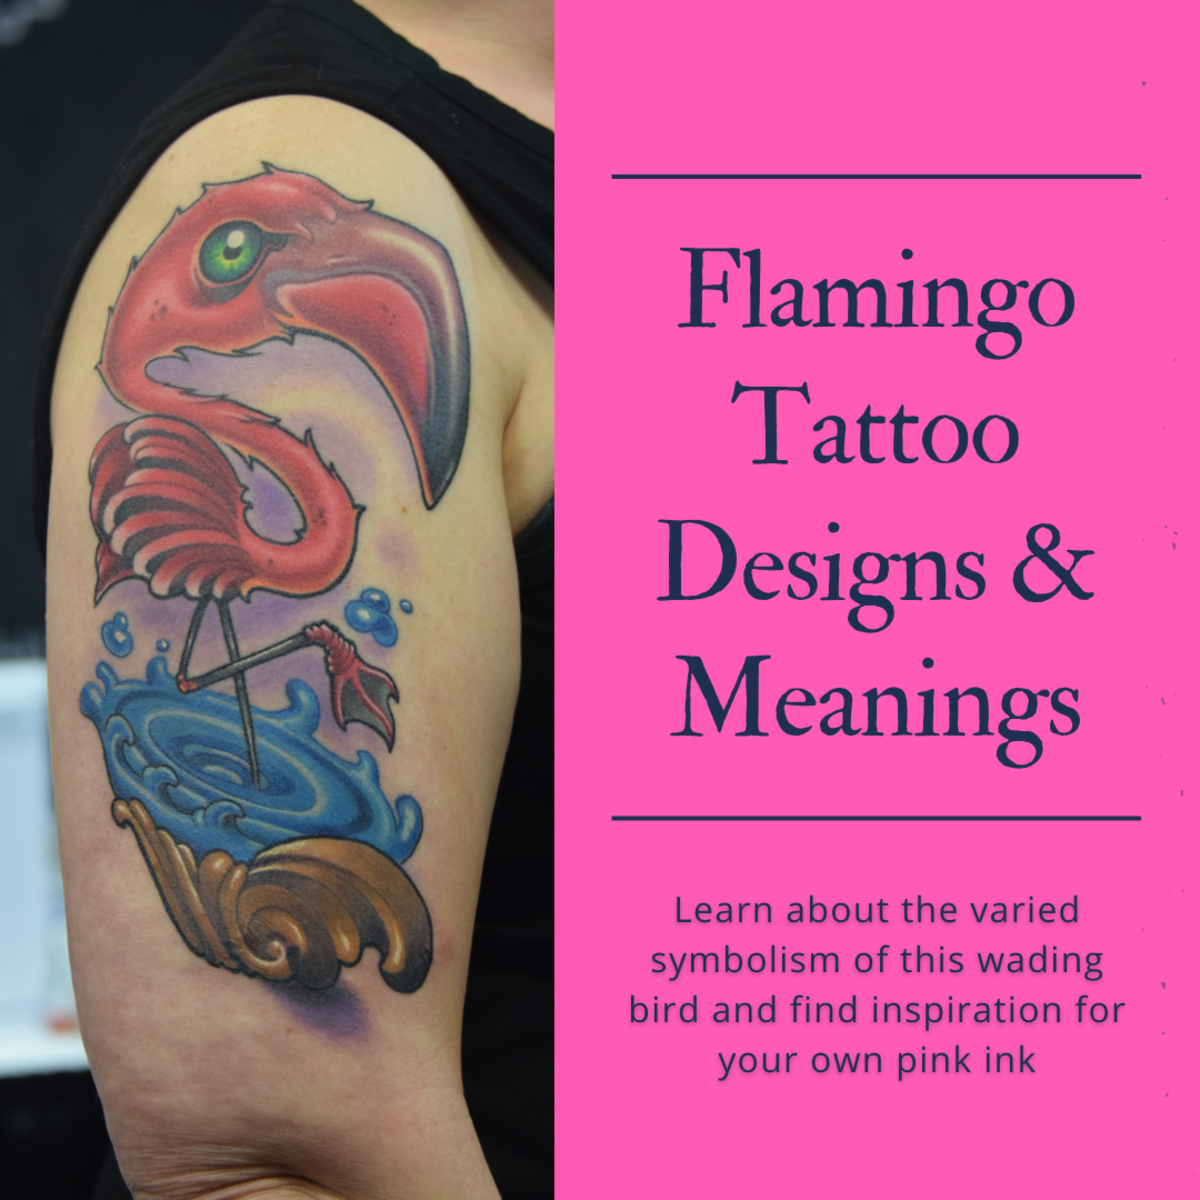 Flamingo Tattoo Designs and Meanings